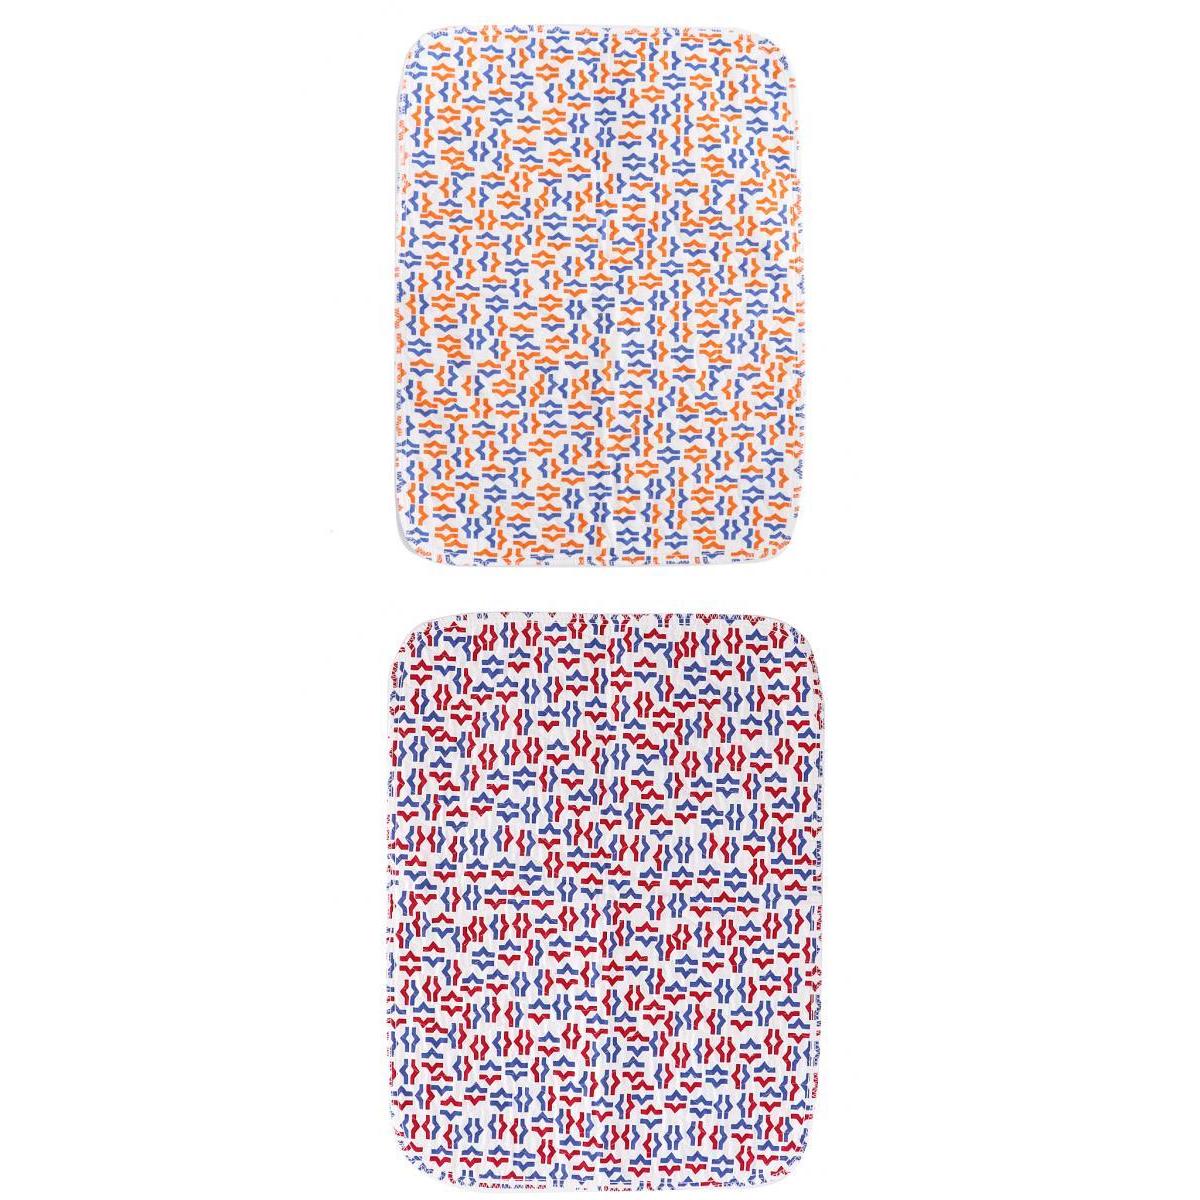 2pcs Reusable Washable Underpad Waterproof Absorbent Incontinent Bed Pad Protector For Children Adults Elders